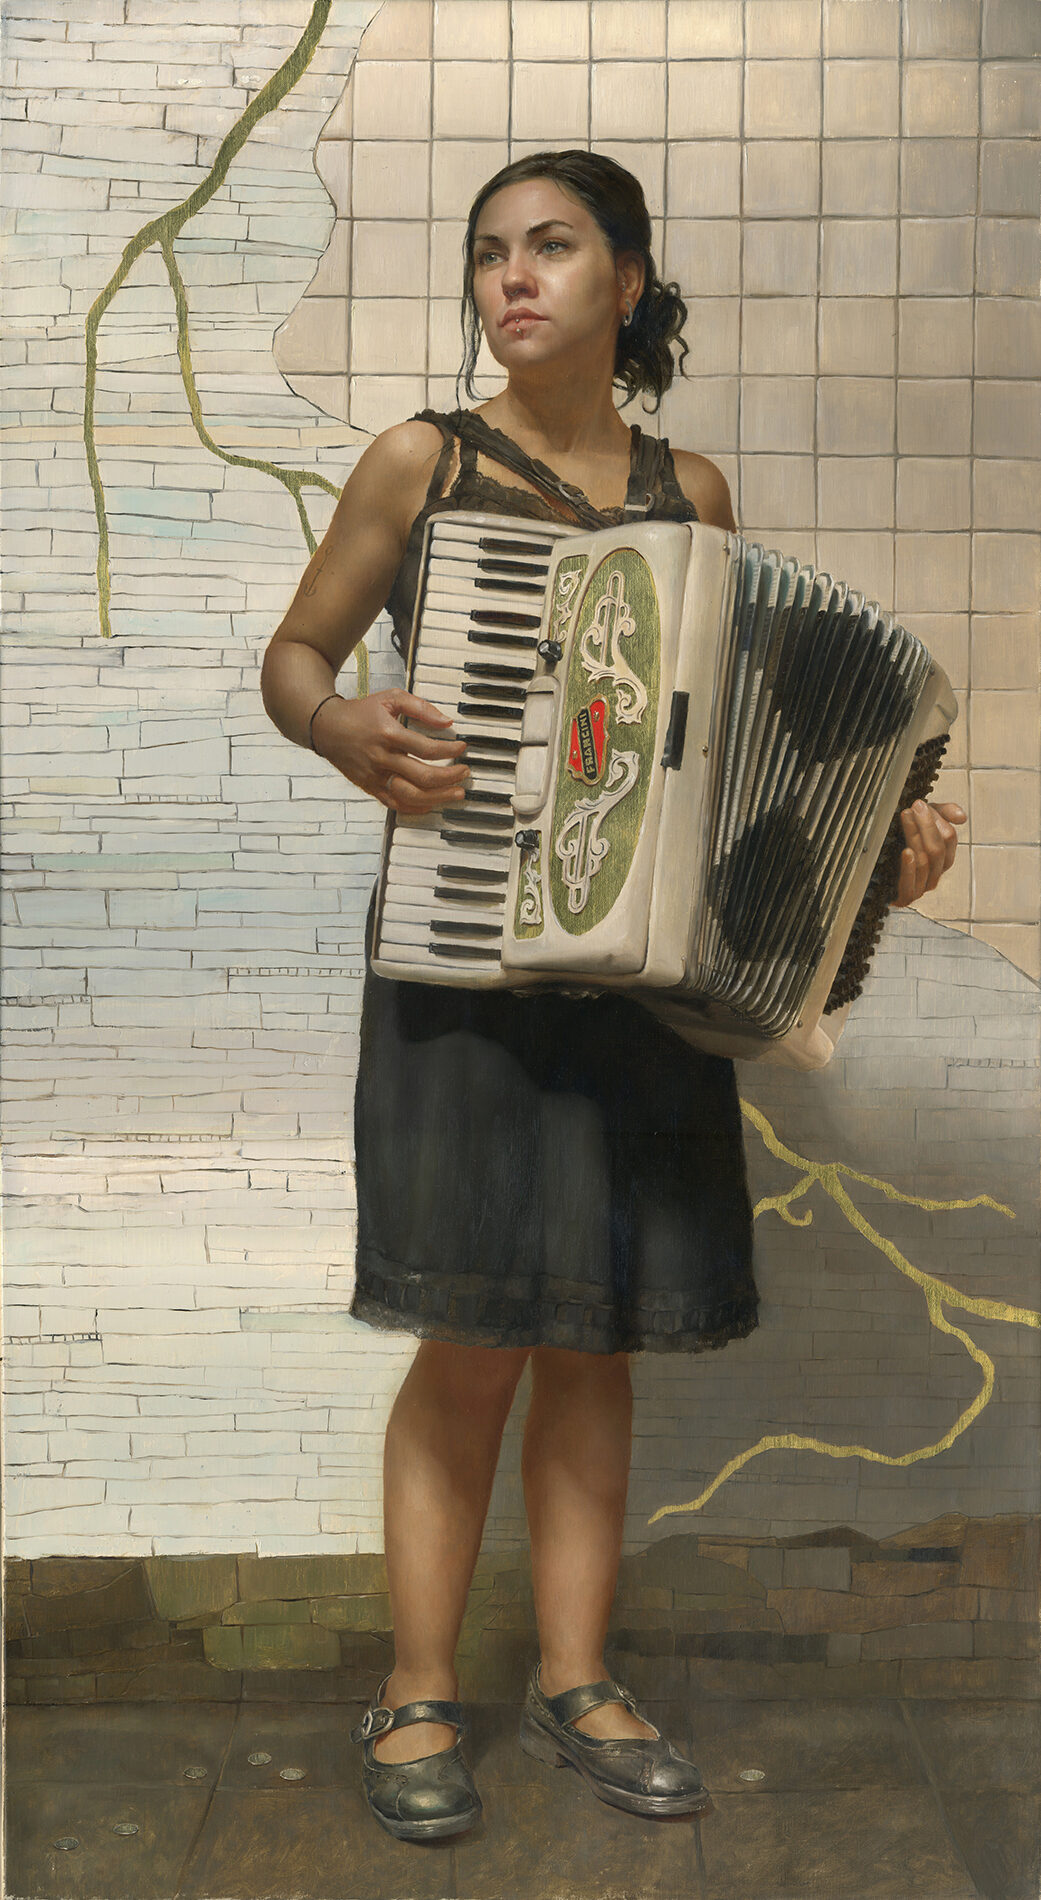 A young woman, standing in a subway platform, playing an accordion.